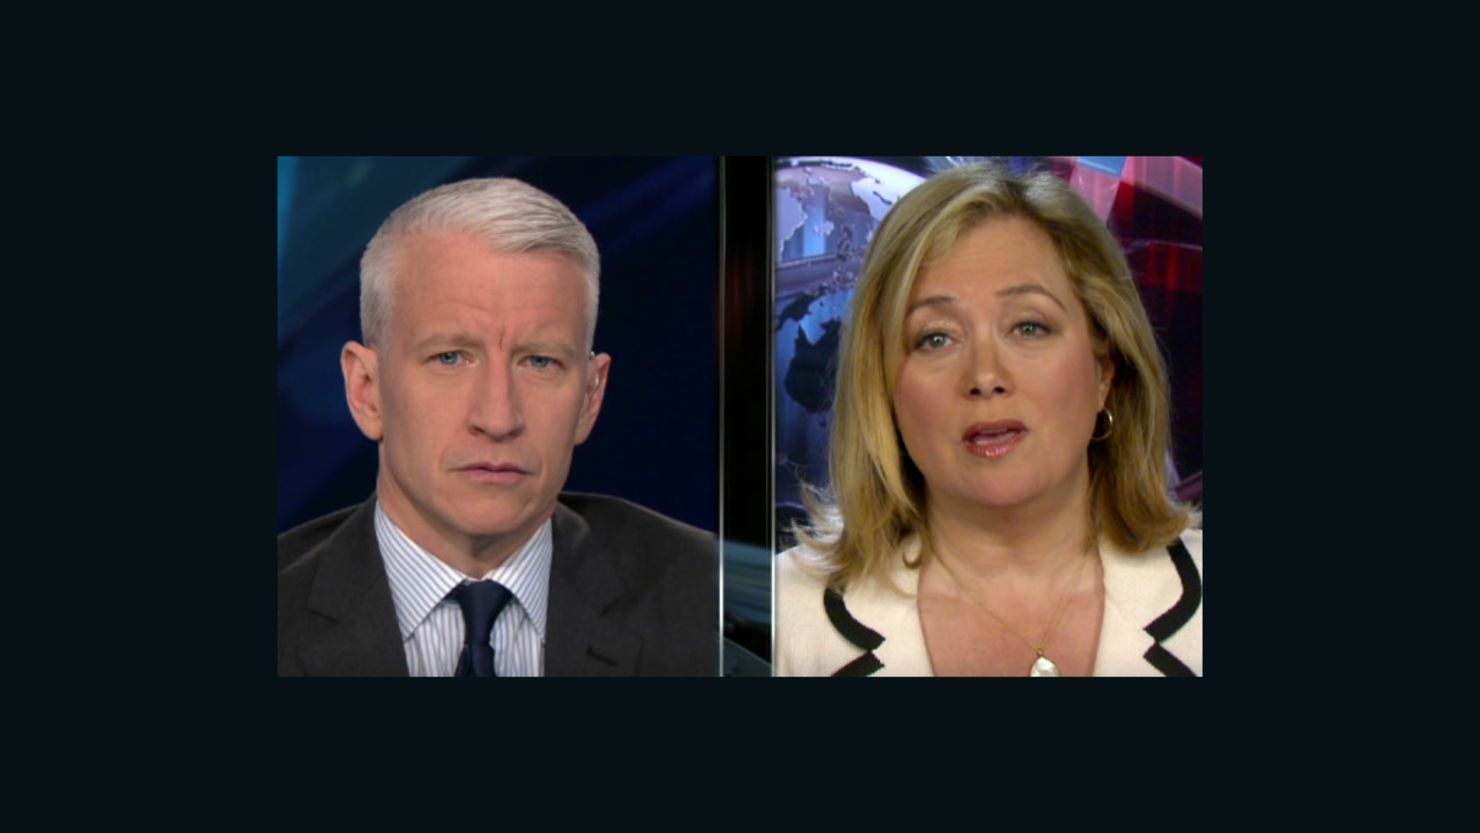 Hilary Rosen's comments about Ann Romney to Anderson Cooper on CNN's "AC360° touched off a political controversy.